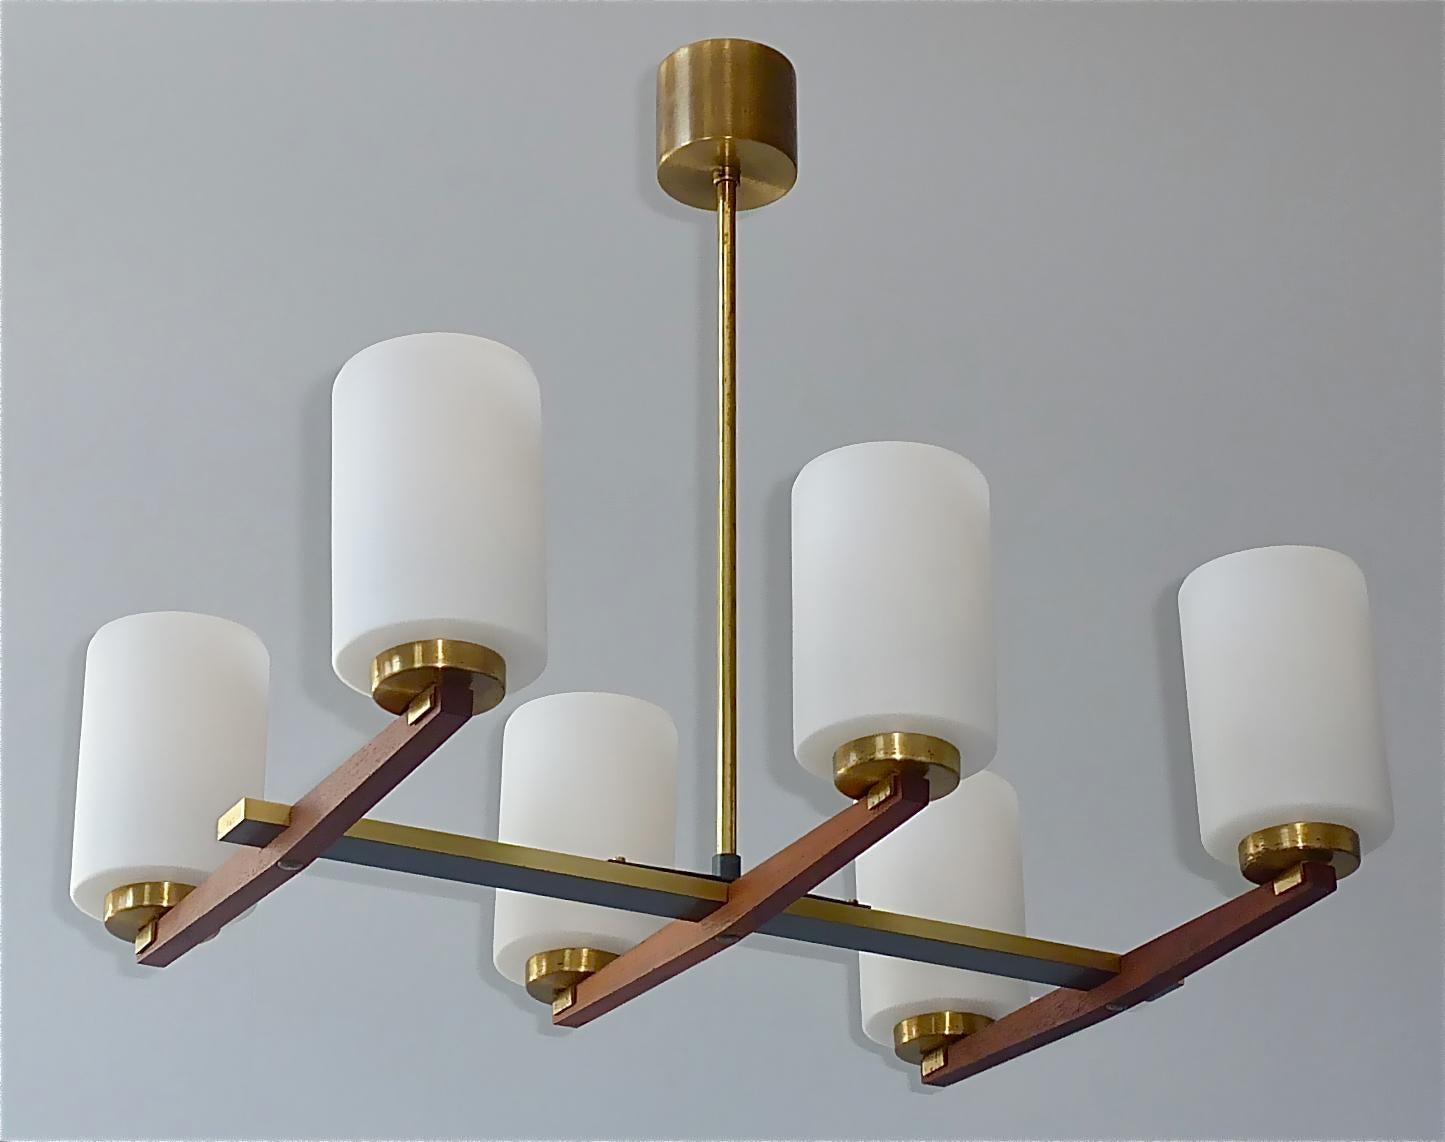 Cool sculptural six-light architect chandelier in the style of Stilnovo Italy and Angelo Lelii for Arredoluce. Signed with rest of remaining oval company label and manufactured by famous Kaiser Leuchten, Germany circa 1950s to 1960s. The timeless